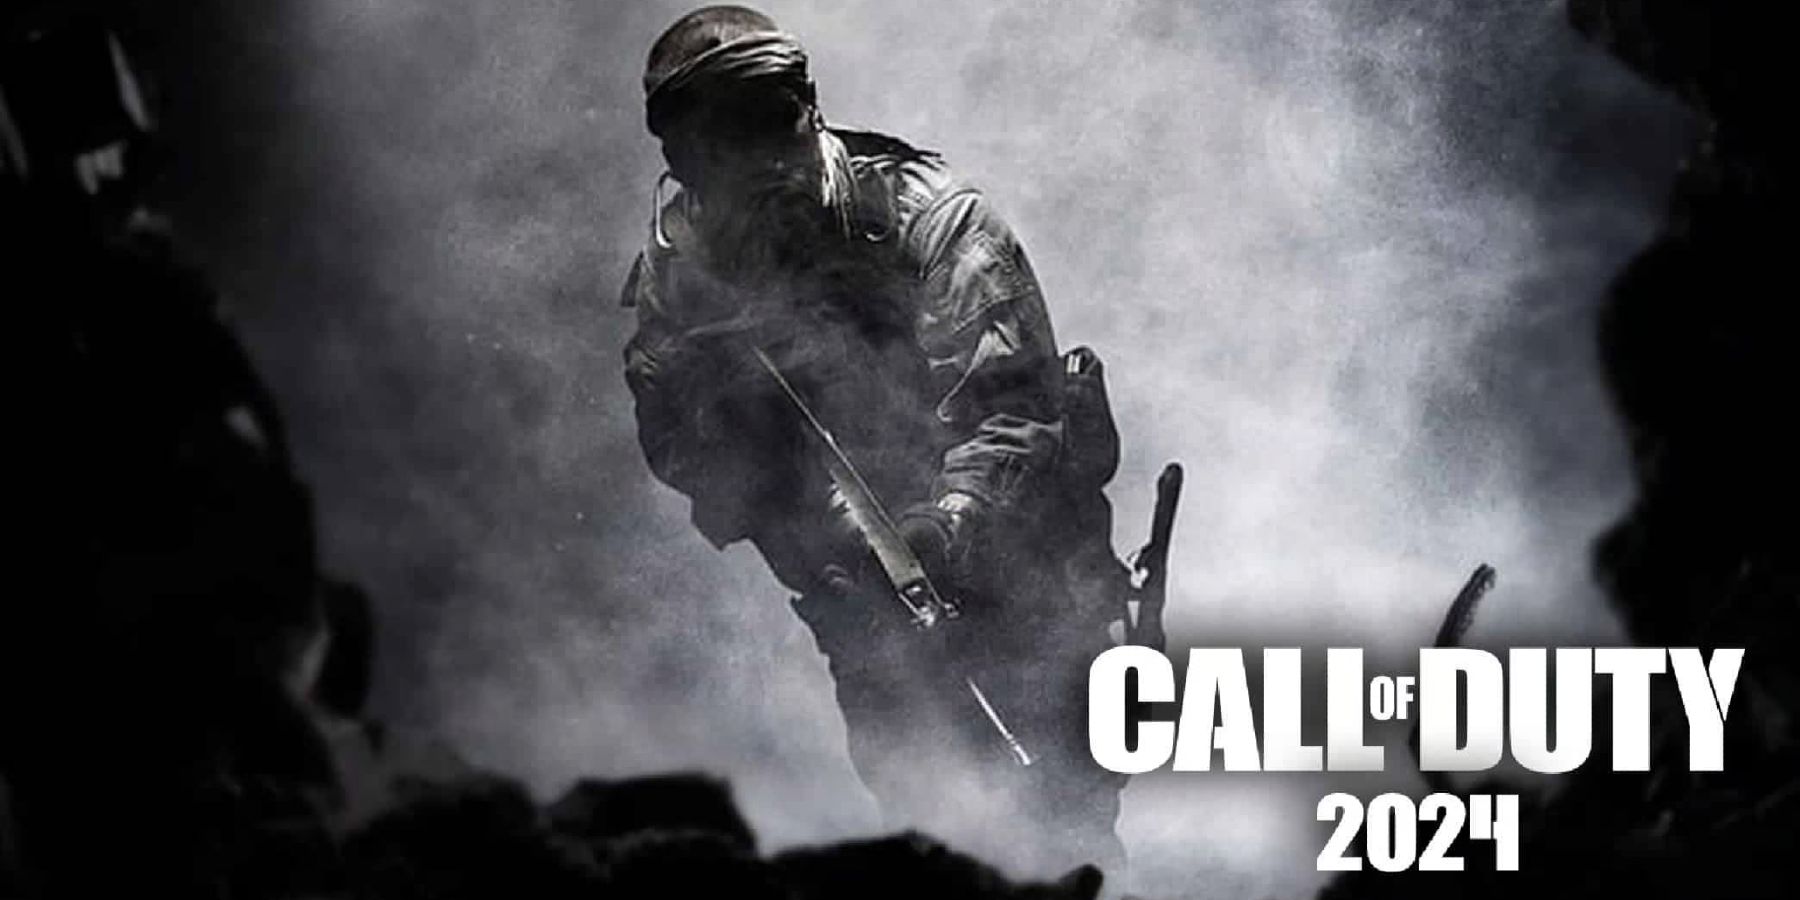 Weapons That Would Make Sense For Call of Duty 2024's Rumored Gulf War